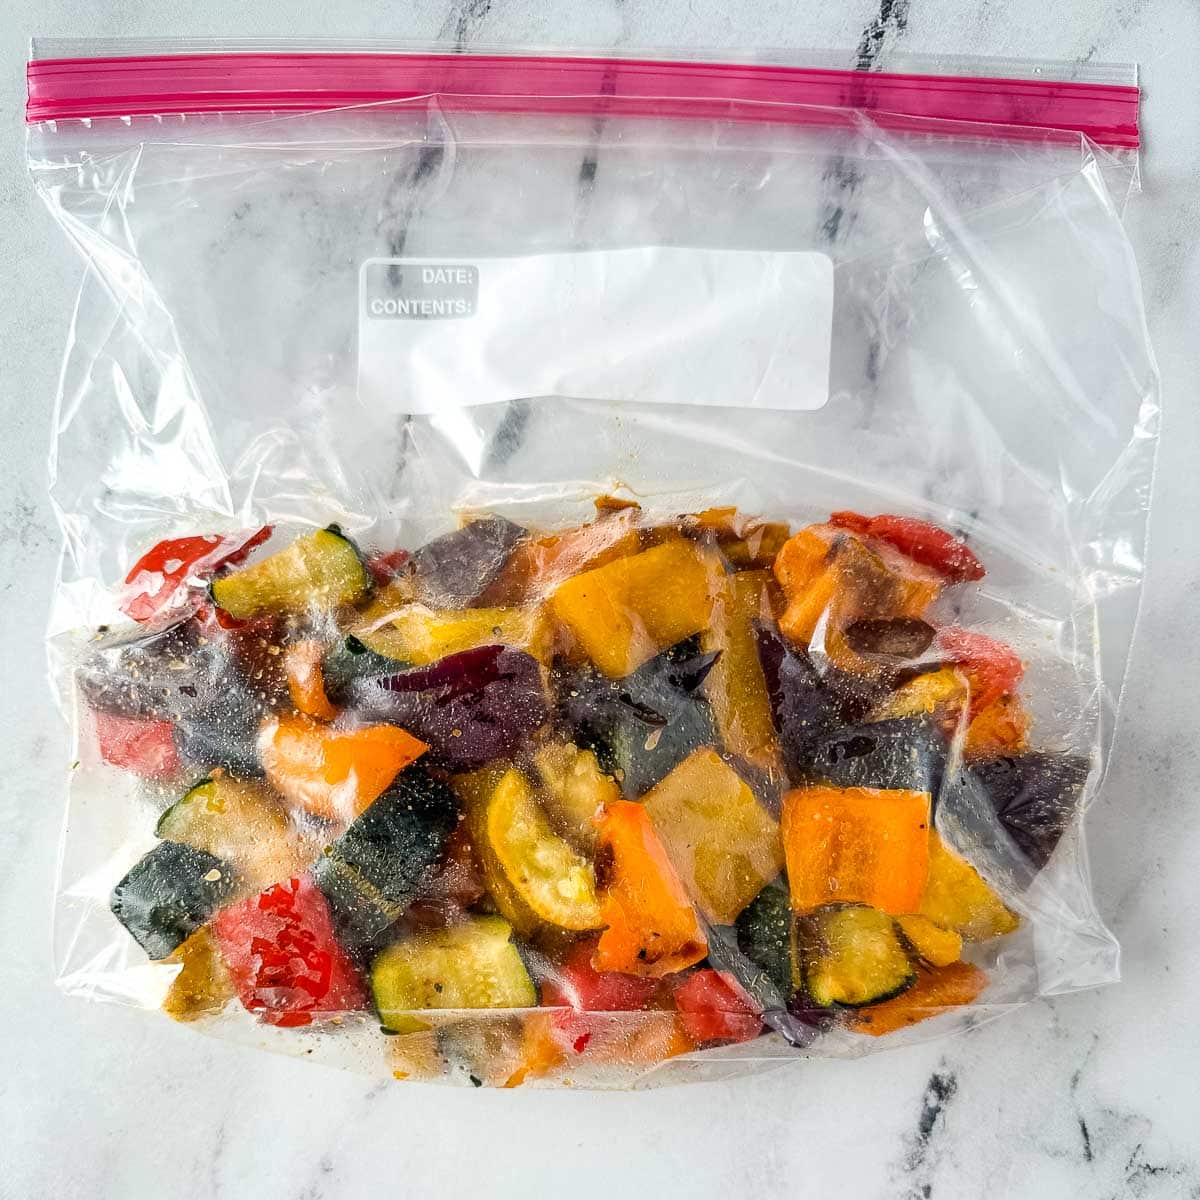 Frozen roasted vegetables in a resealable plastic bag.